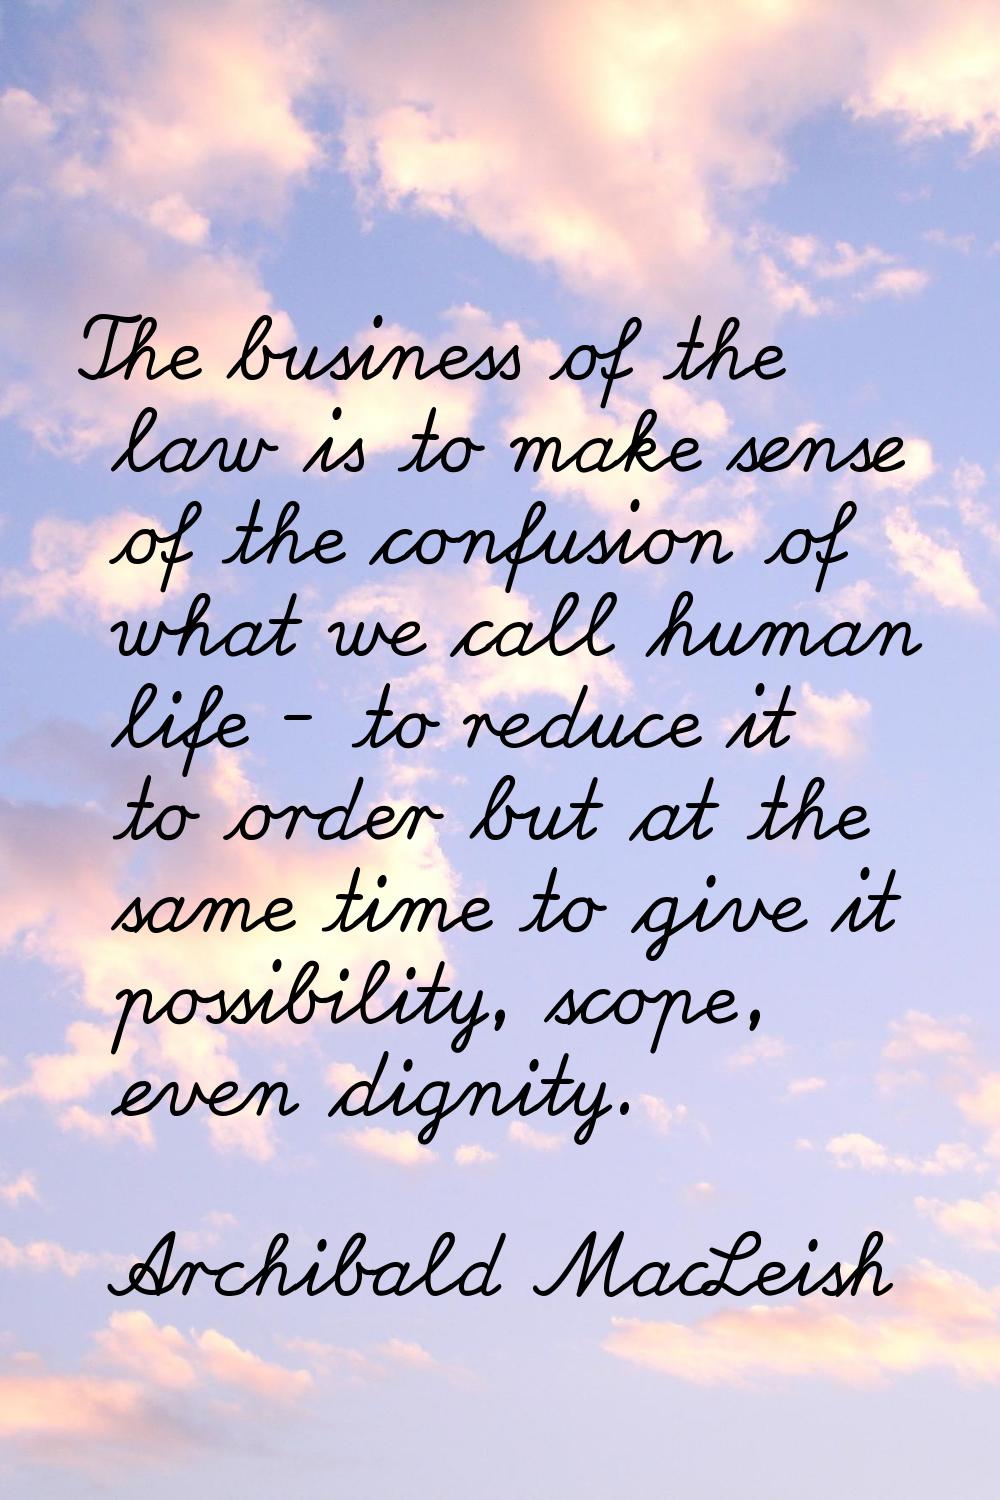 The business of the law is to make sense of the confusion of what we call human life - to reduce it